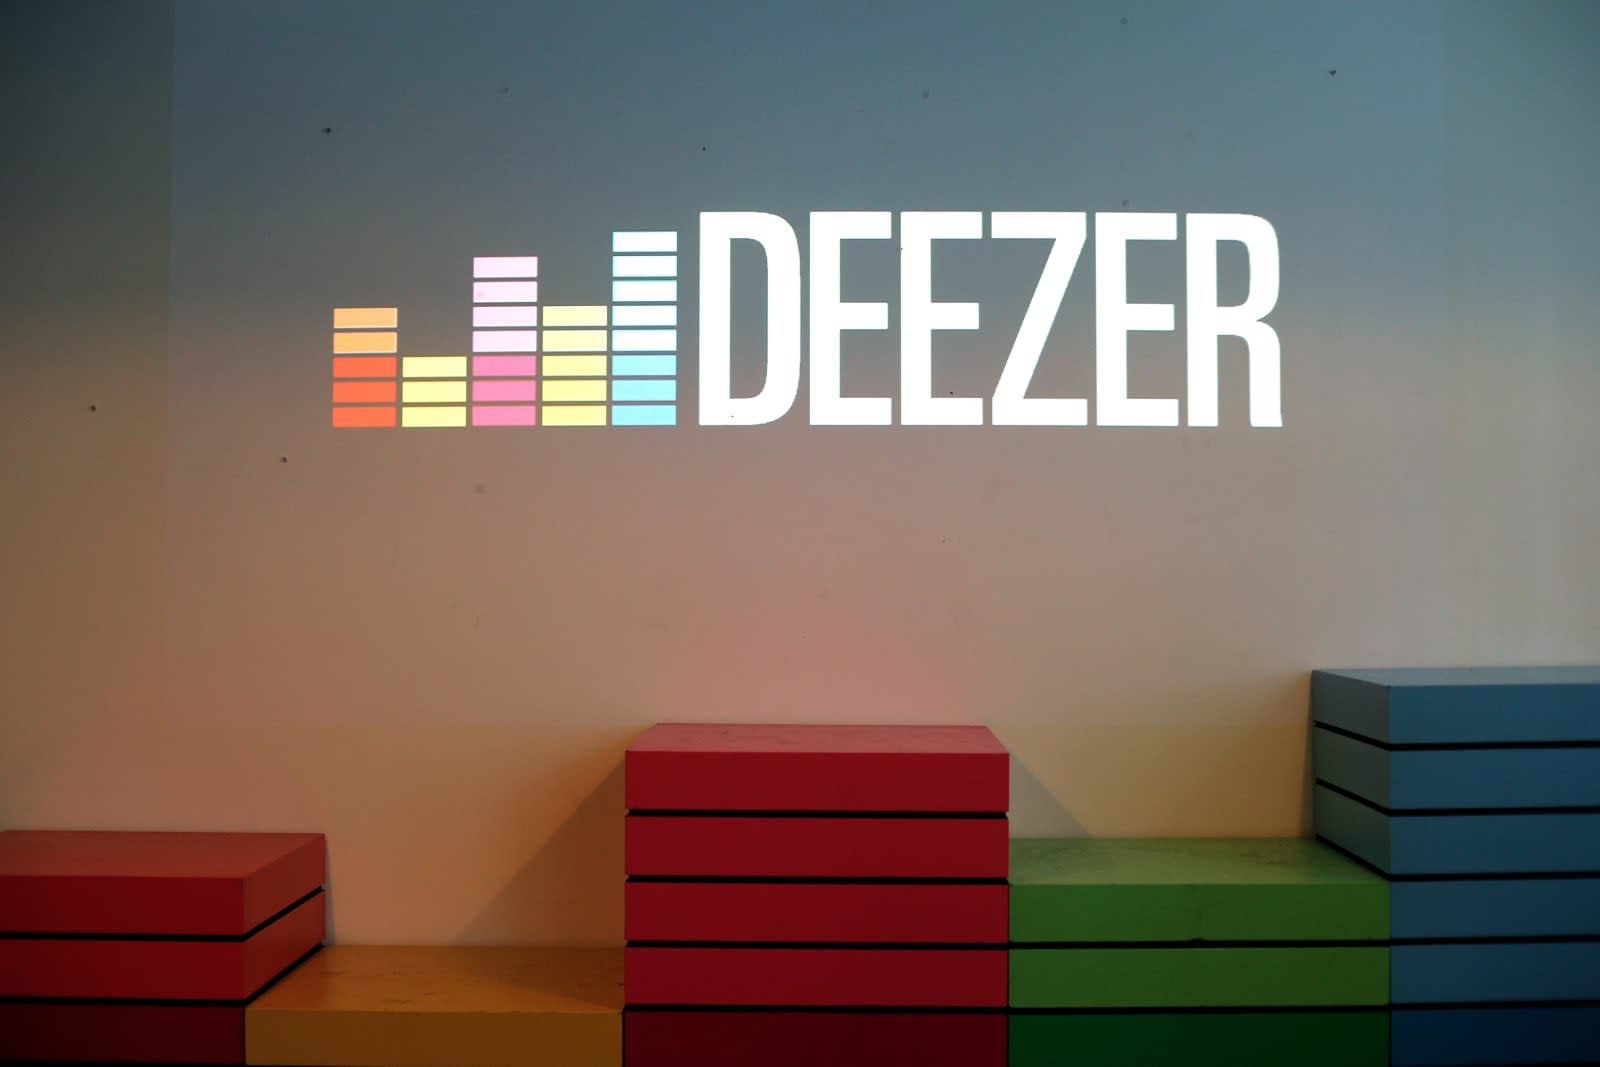 Deezer S New App Serves Up 30 000 Radio Stations For Free Engadget